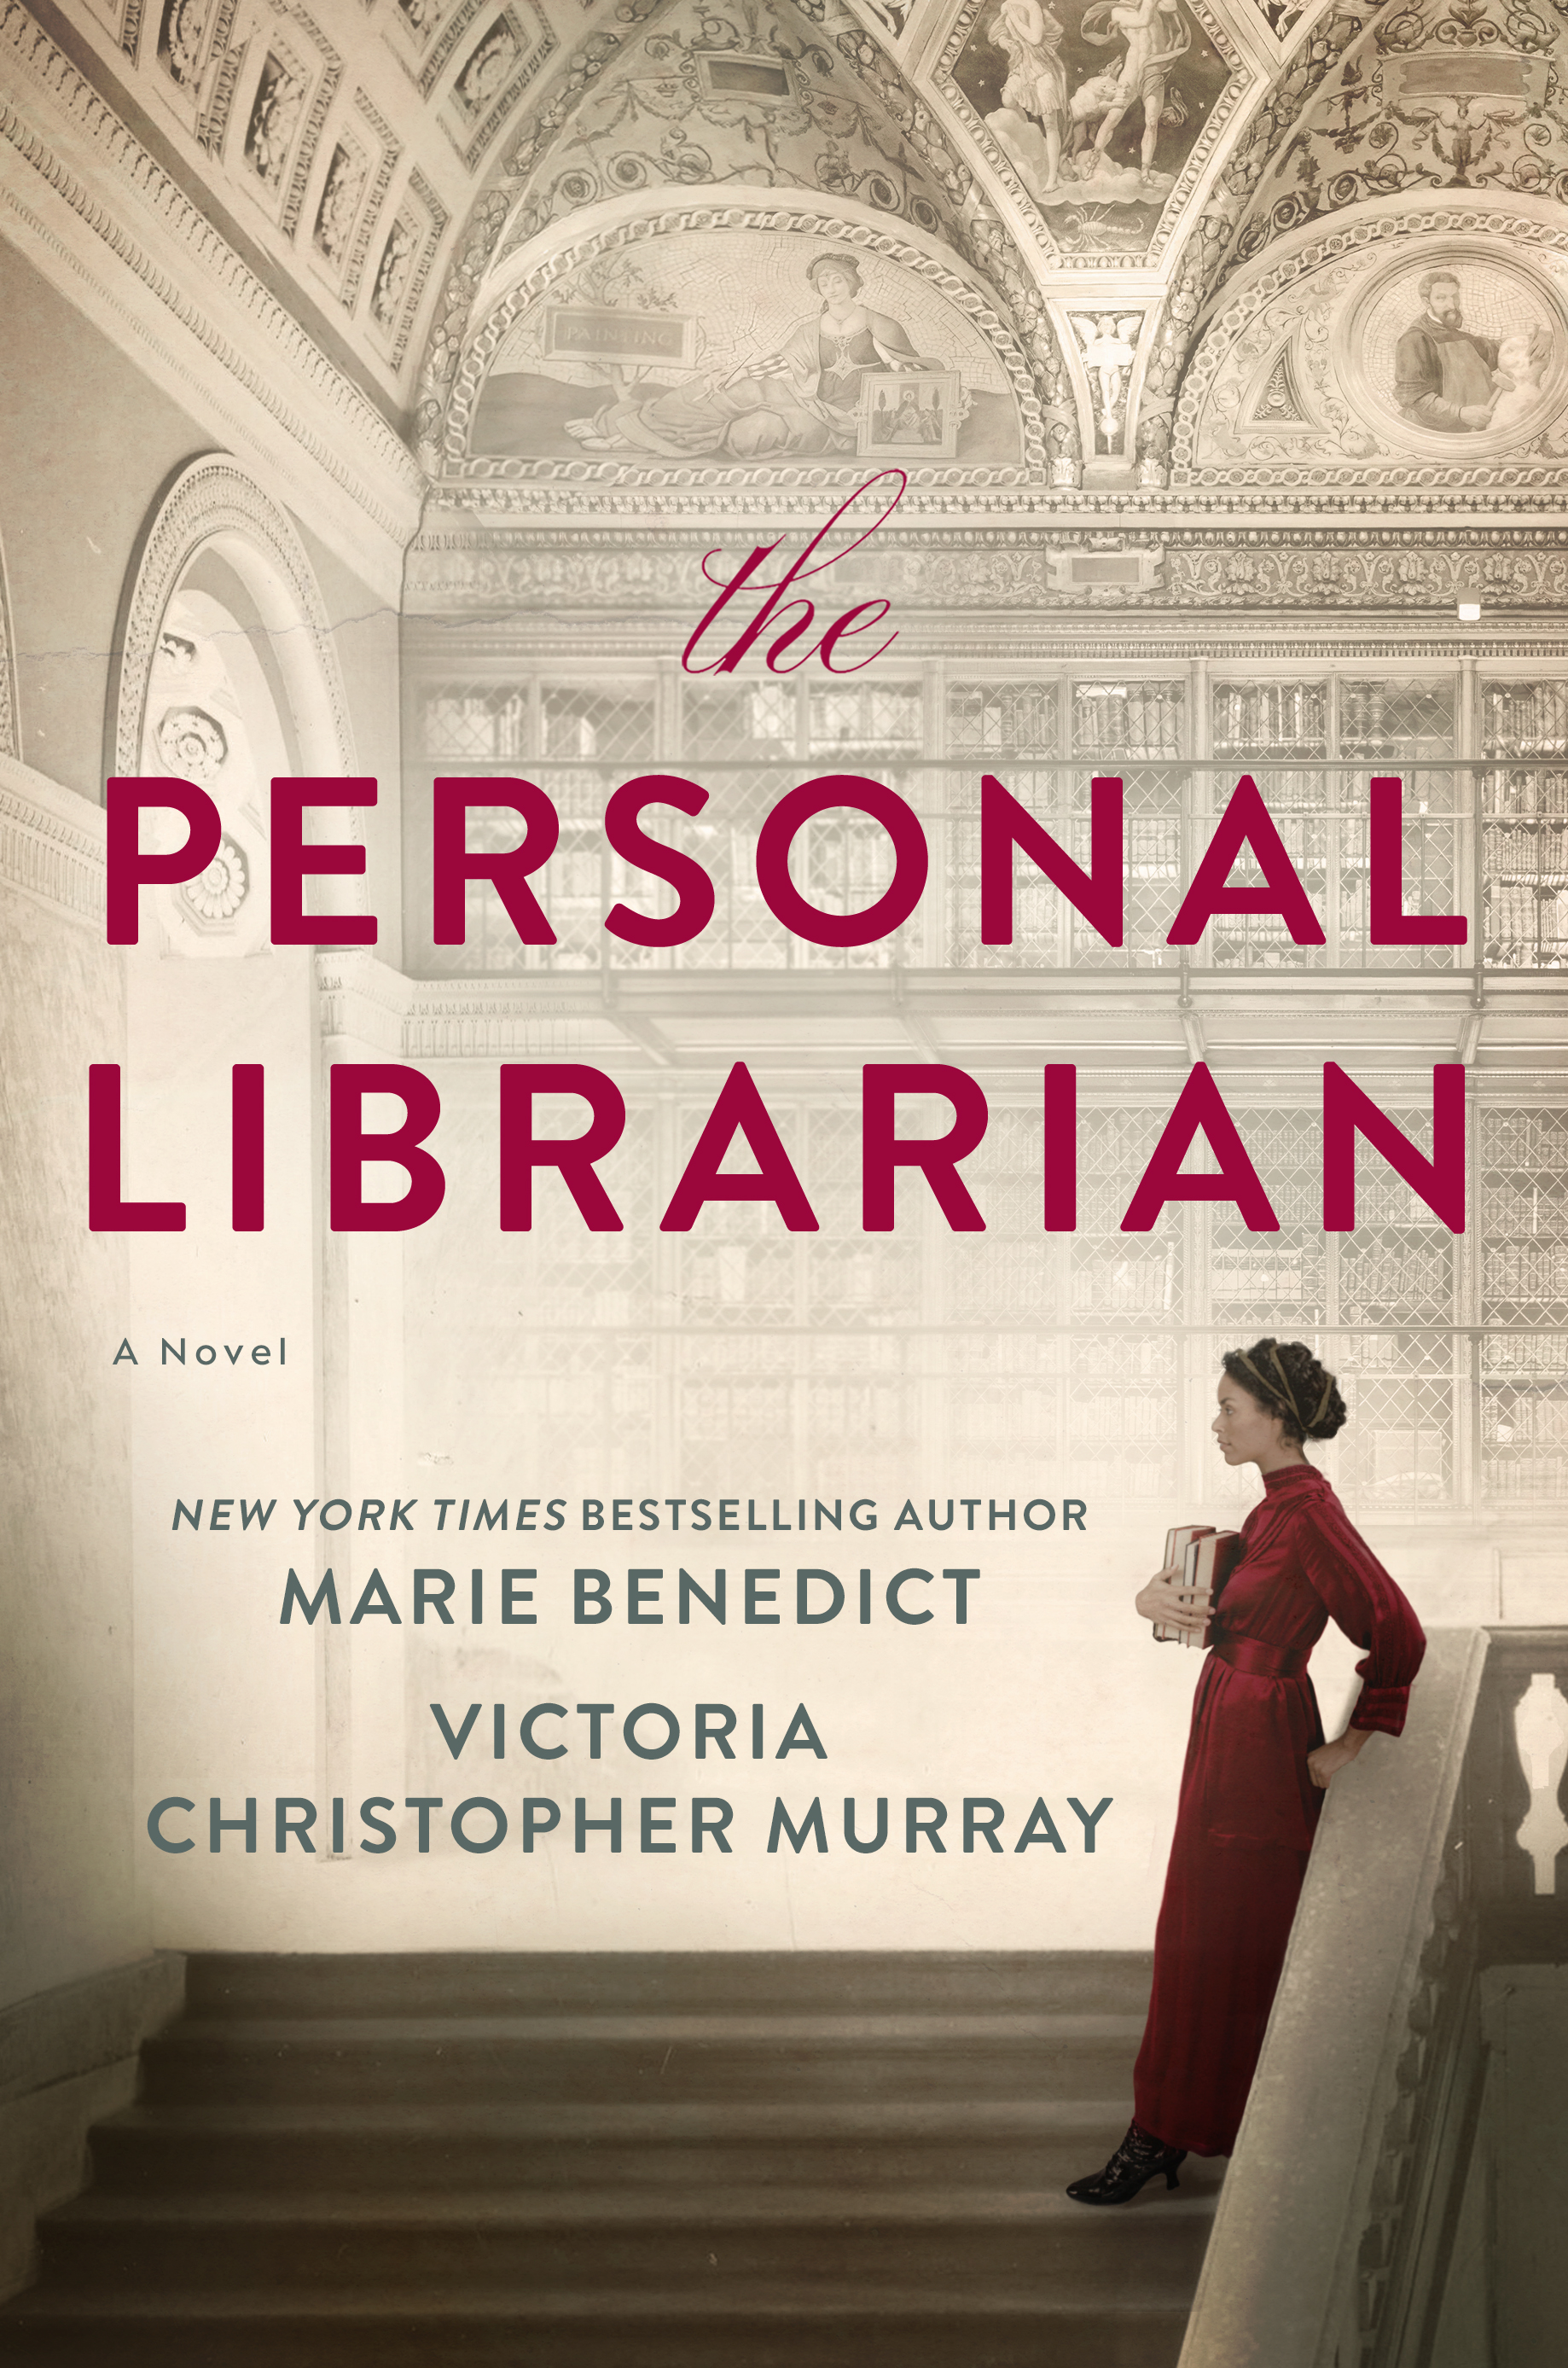 Cover of The Personal Librarian by Marie Benedict and Victoria Christopher Murray.